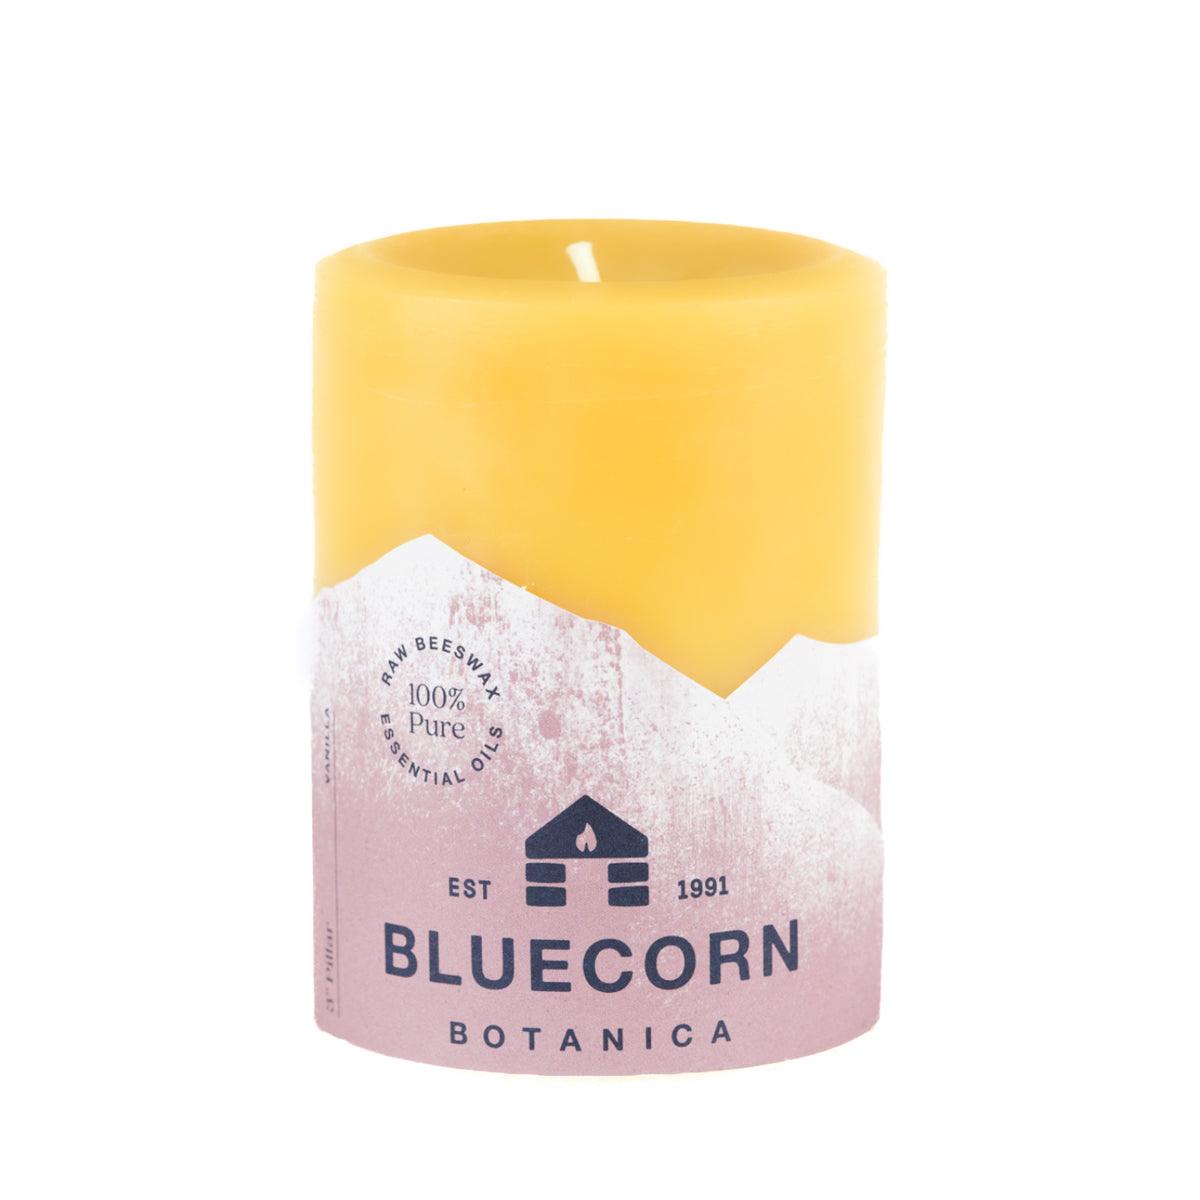 Bluecorn Botanica 100% Pure Beeswax Vanilla 3" x 4" Scented Pillar Candle. Burn Time: 60 hours. Made with 100% Pure Beeswax, 100% Pure Essential Oils, and a 100% pure cotton wick, no lead. Candles are paraffin free, clean burning and non-toxic. Features Bluecorn Botanica label in Brown printed on 100% recycled paper. Wax is golden in color. 